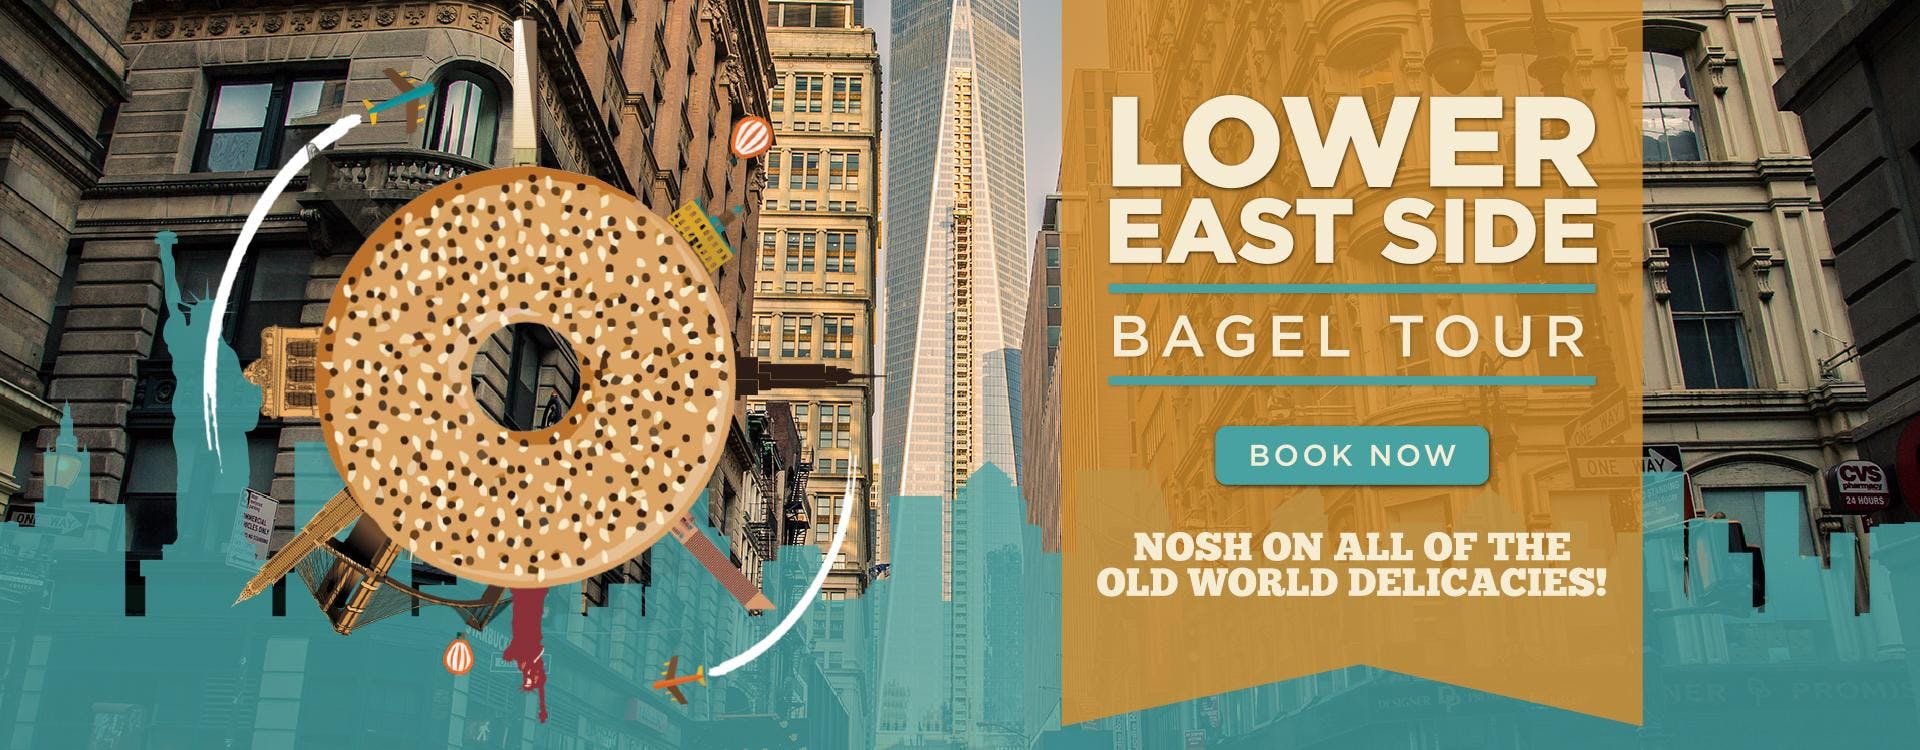 Lower East Side NYC: Bagel / Nosh Tour BEST Walking Tour NYC